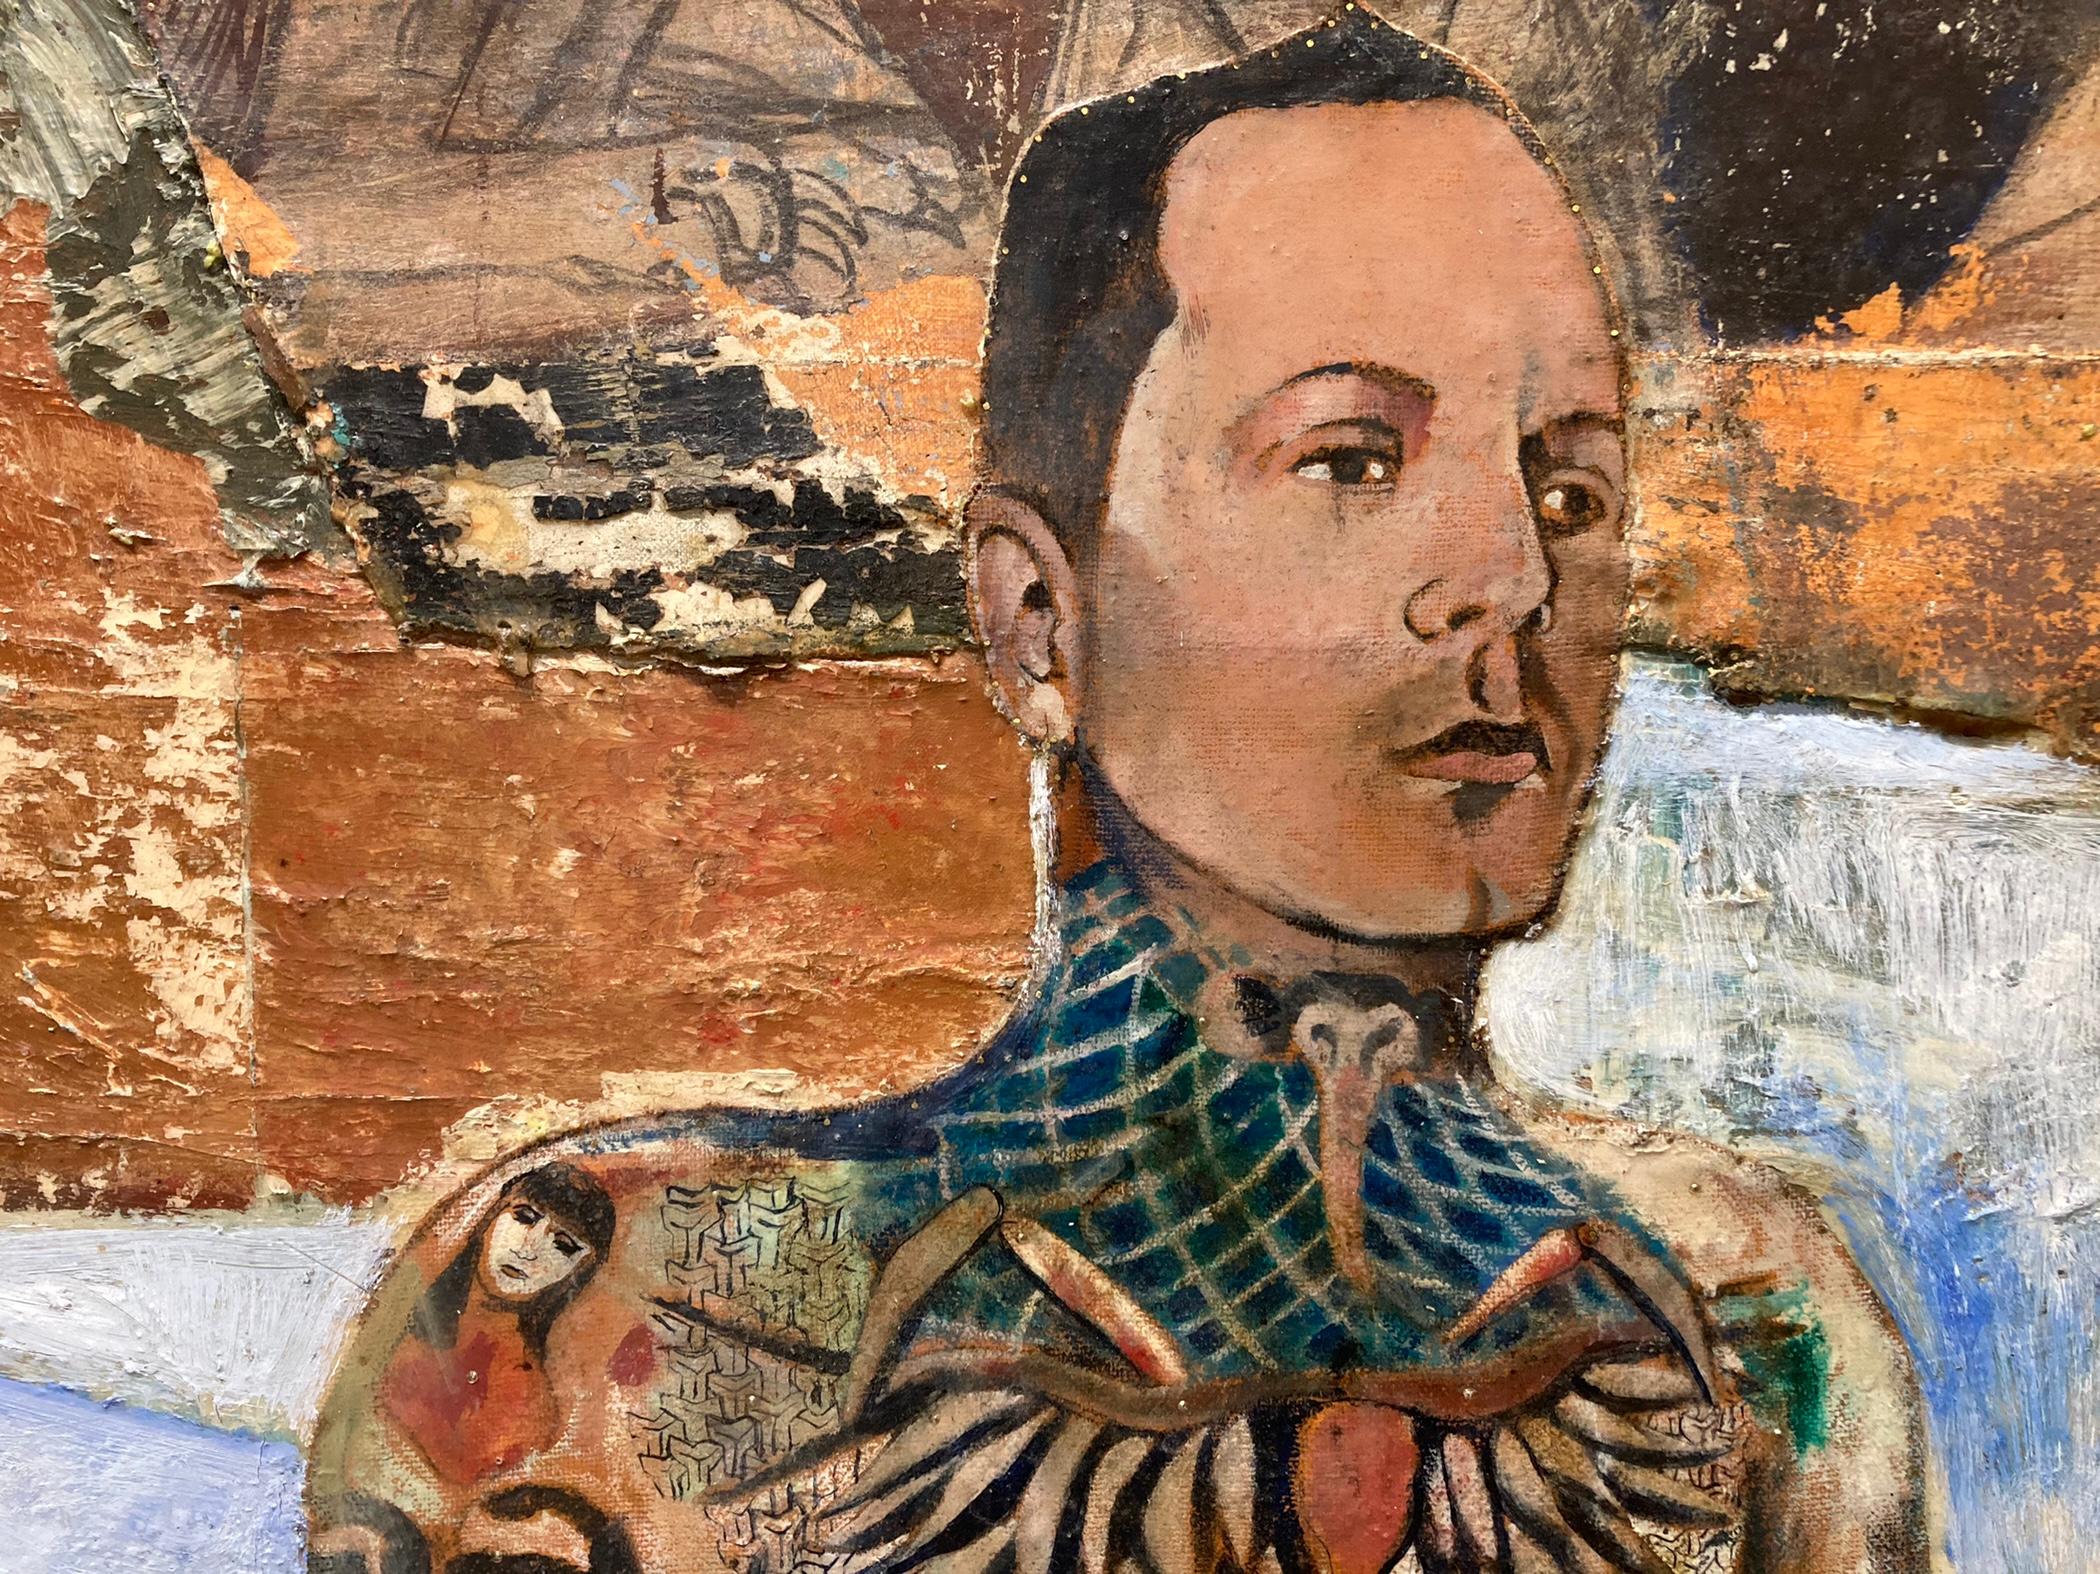 A mixed media painting showing a seated man with tattoos. In “Illustrated Man” we see a single figure, covered in tattoos; portraits, designs, and patterns coat the man's skin from torso to fingertips. His face remains pure, unscathed from any ink